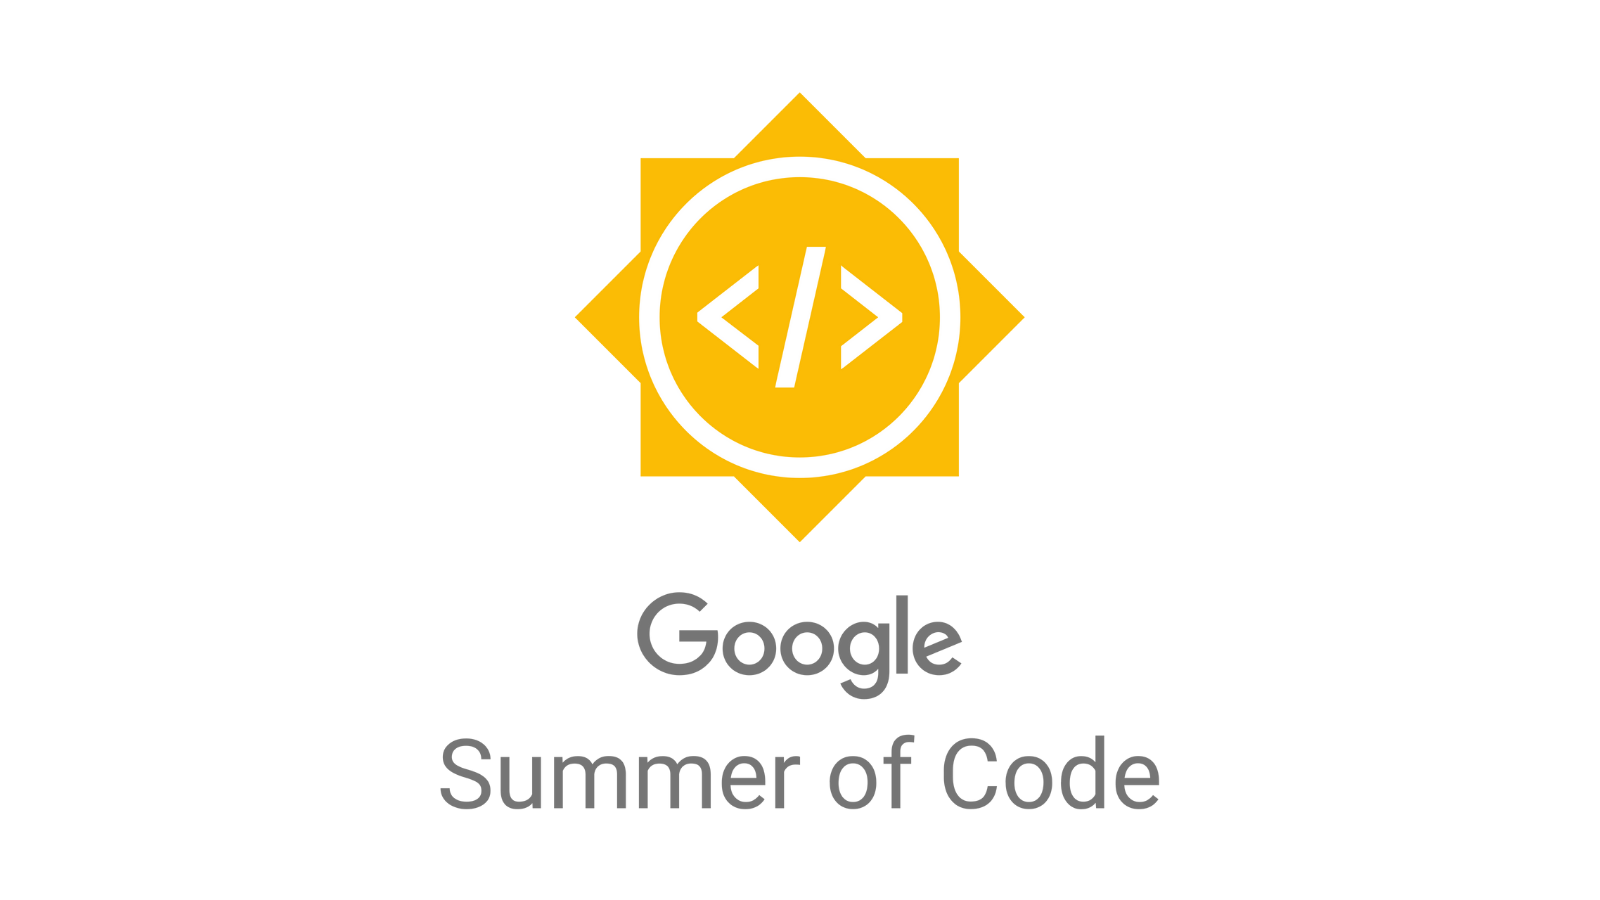 A poster of Google Summer of Code (GSoC).